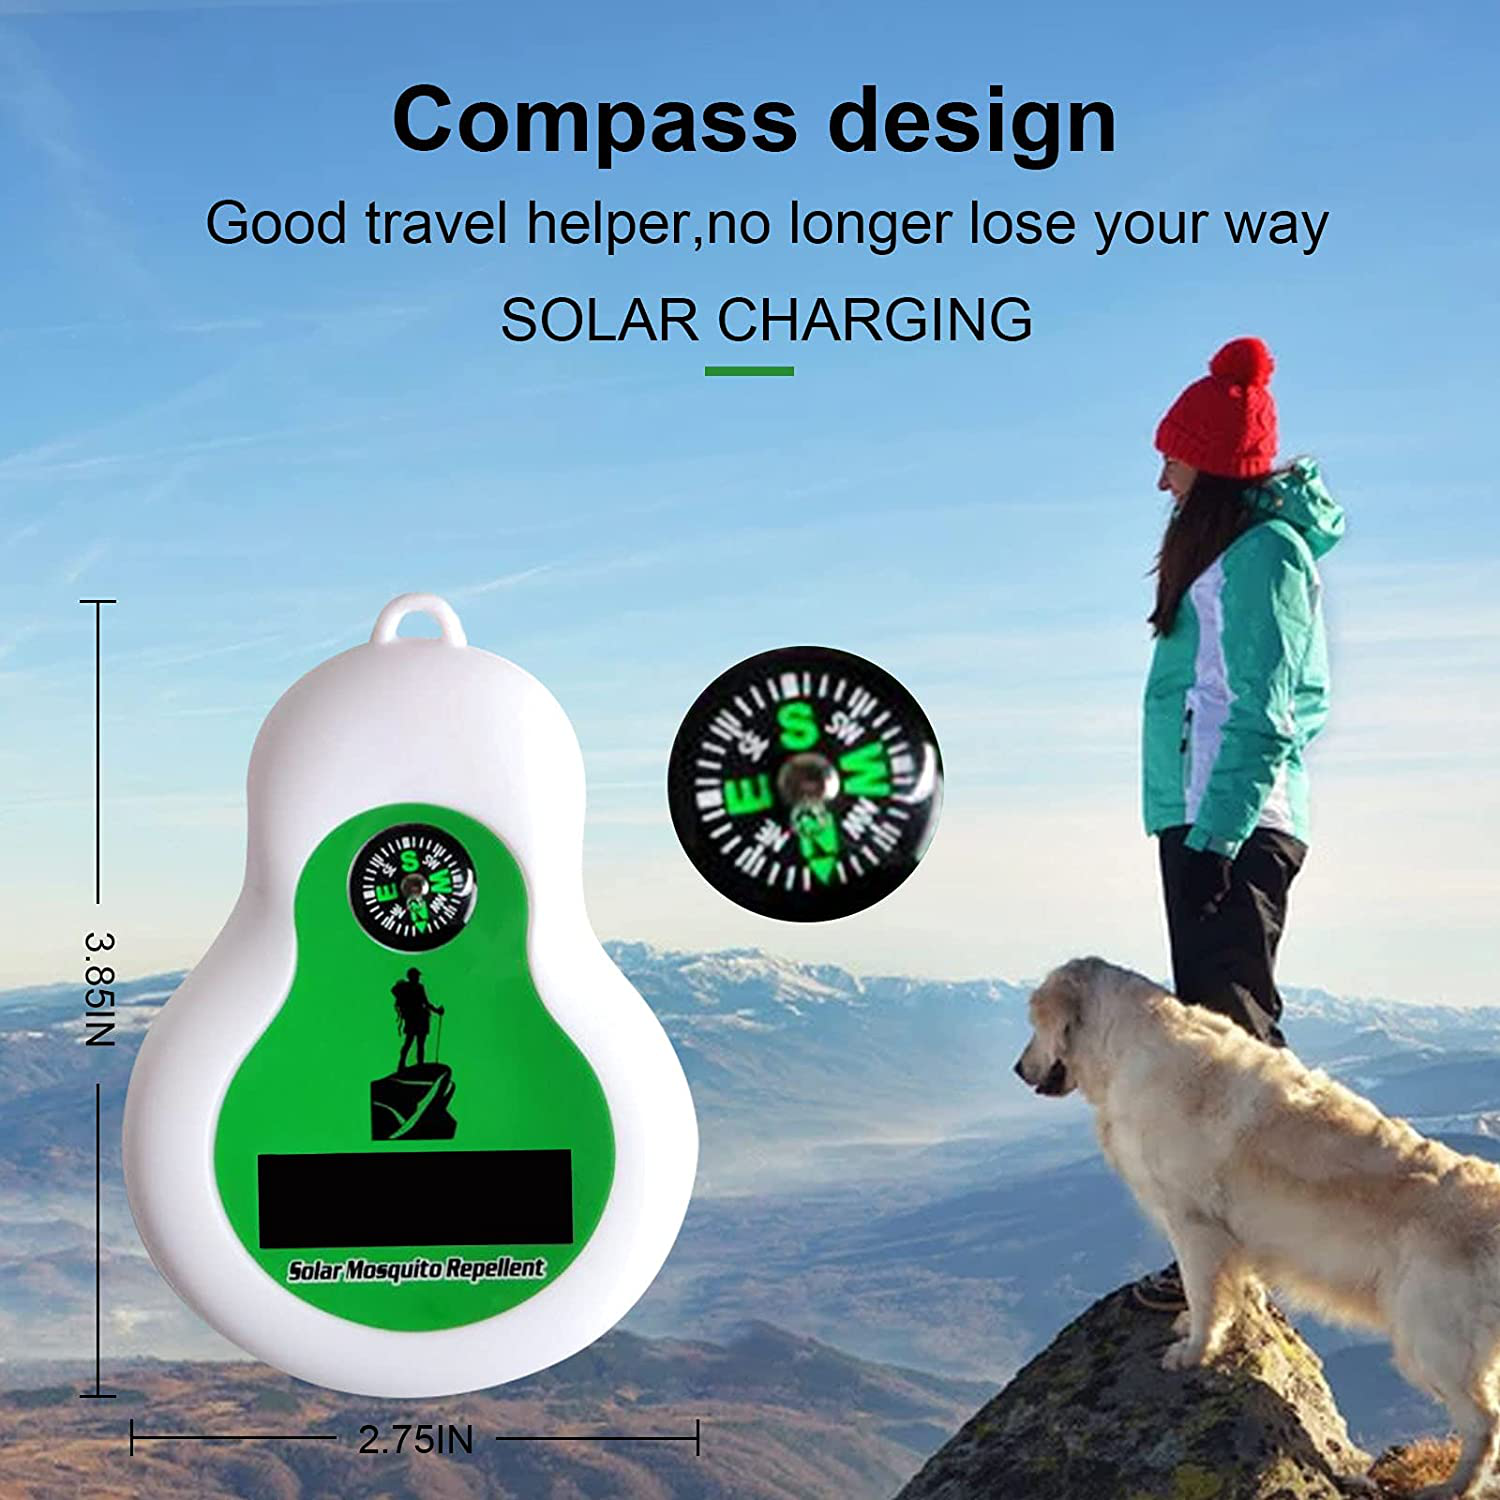 Solar Ultrasonic Outdoor Mosquito Repellent Bug Zapper Outdoor with Compass, Zapper Mosquito Can be Hung Zapper Electronic Insect Killer Design for Camping, Mountaineering, Picnic, Cycling